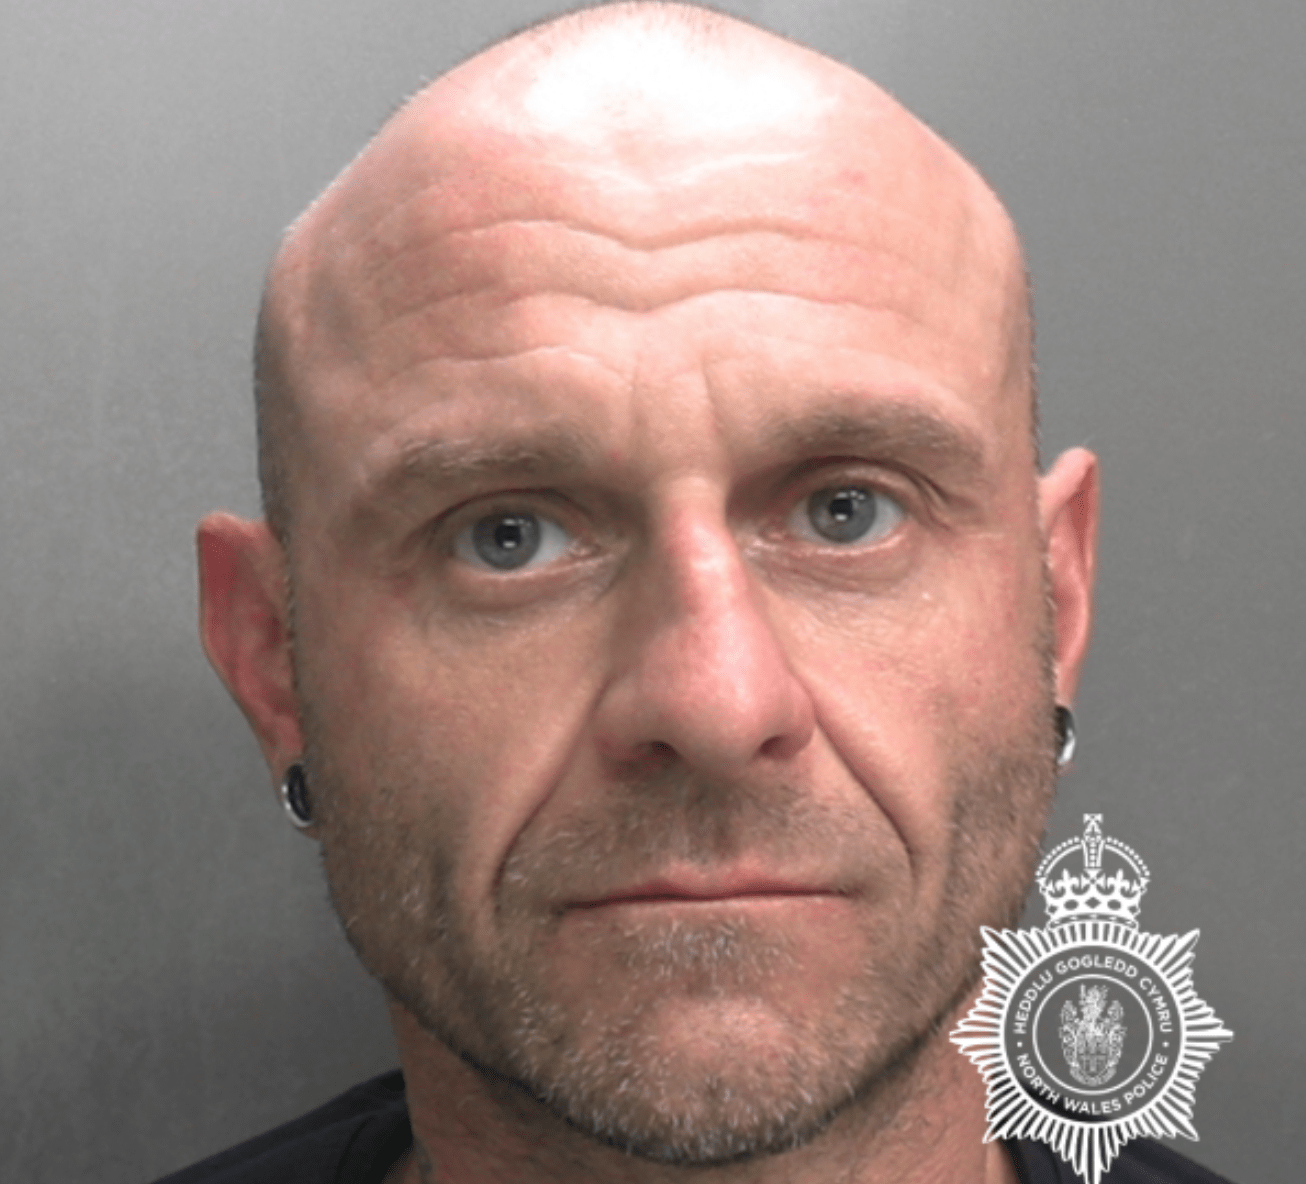 Wrexham man jailed for vicious and prolonged attack on former partner